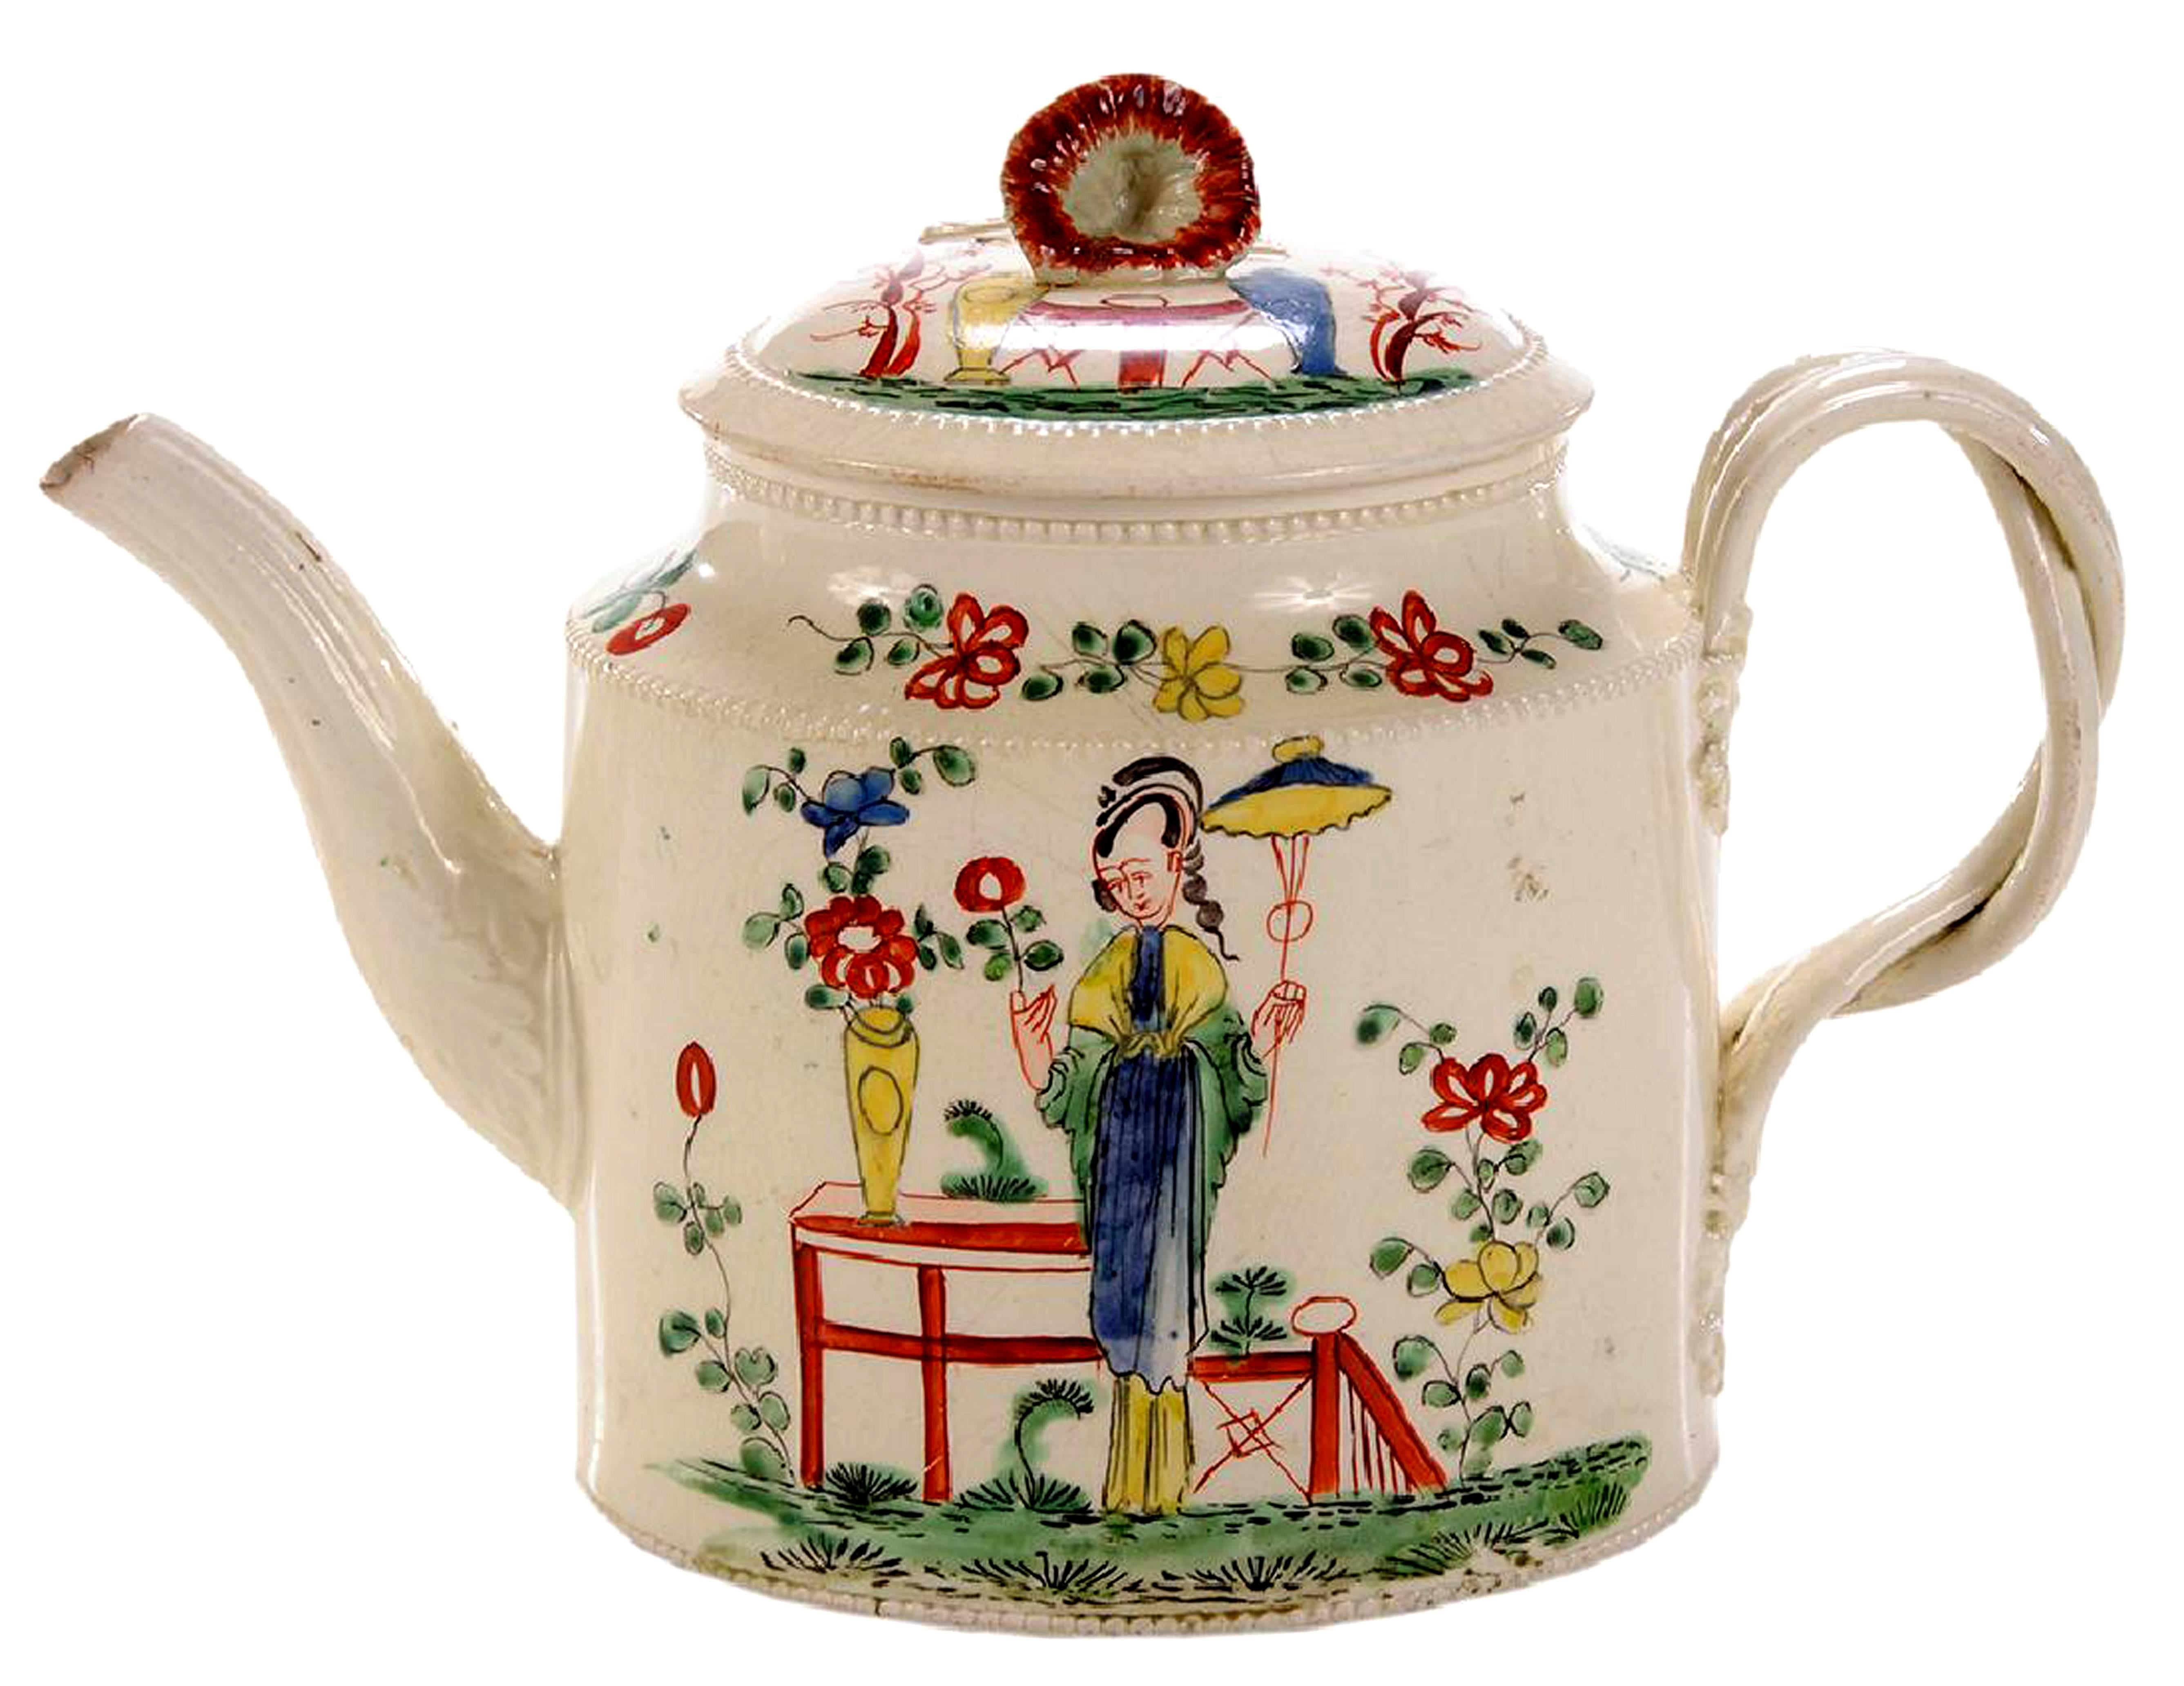 Chinoiserie creamware pottery teapot and cover, 
Melbourne, Derbyshire,
circa 1765.

A drum-shaped body with beaded edges, interlaced handle and leaf-molded spout and painted with polychrome enamels with a large Chinese figure to each side. The